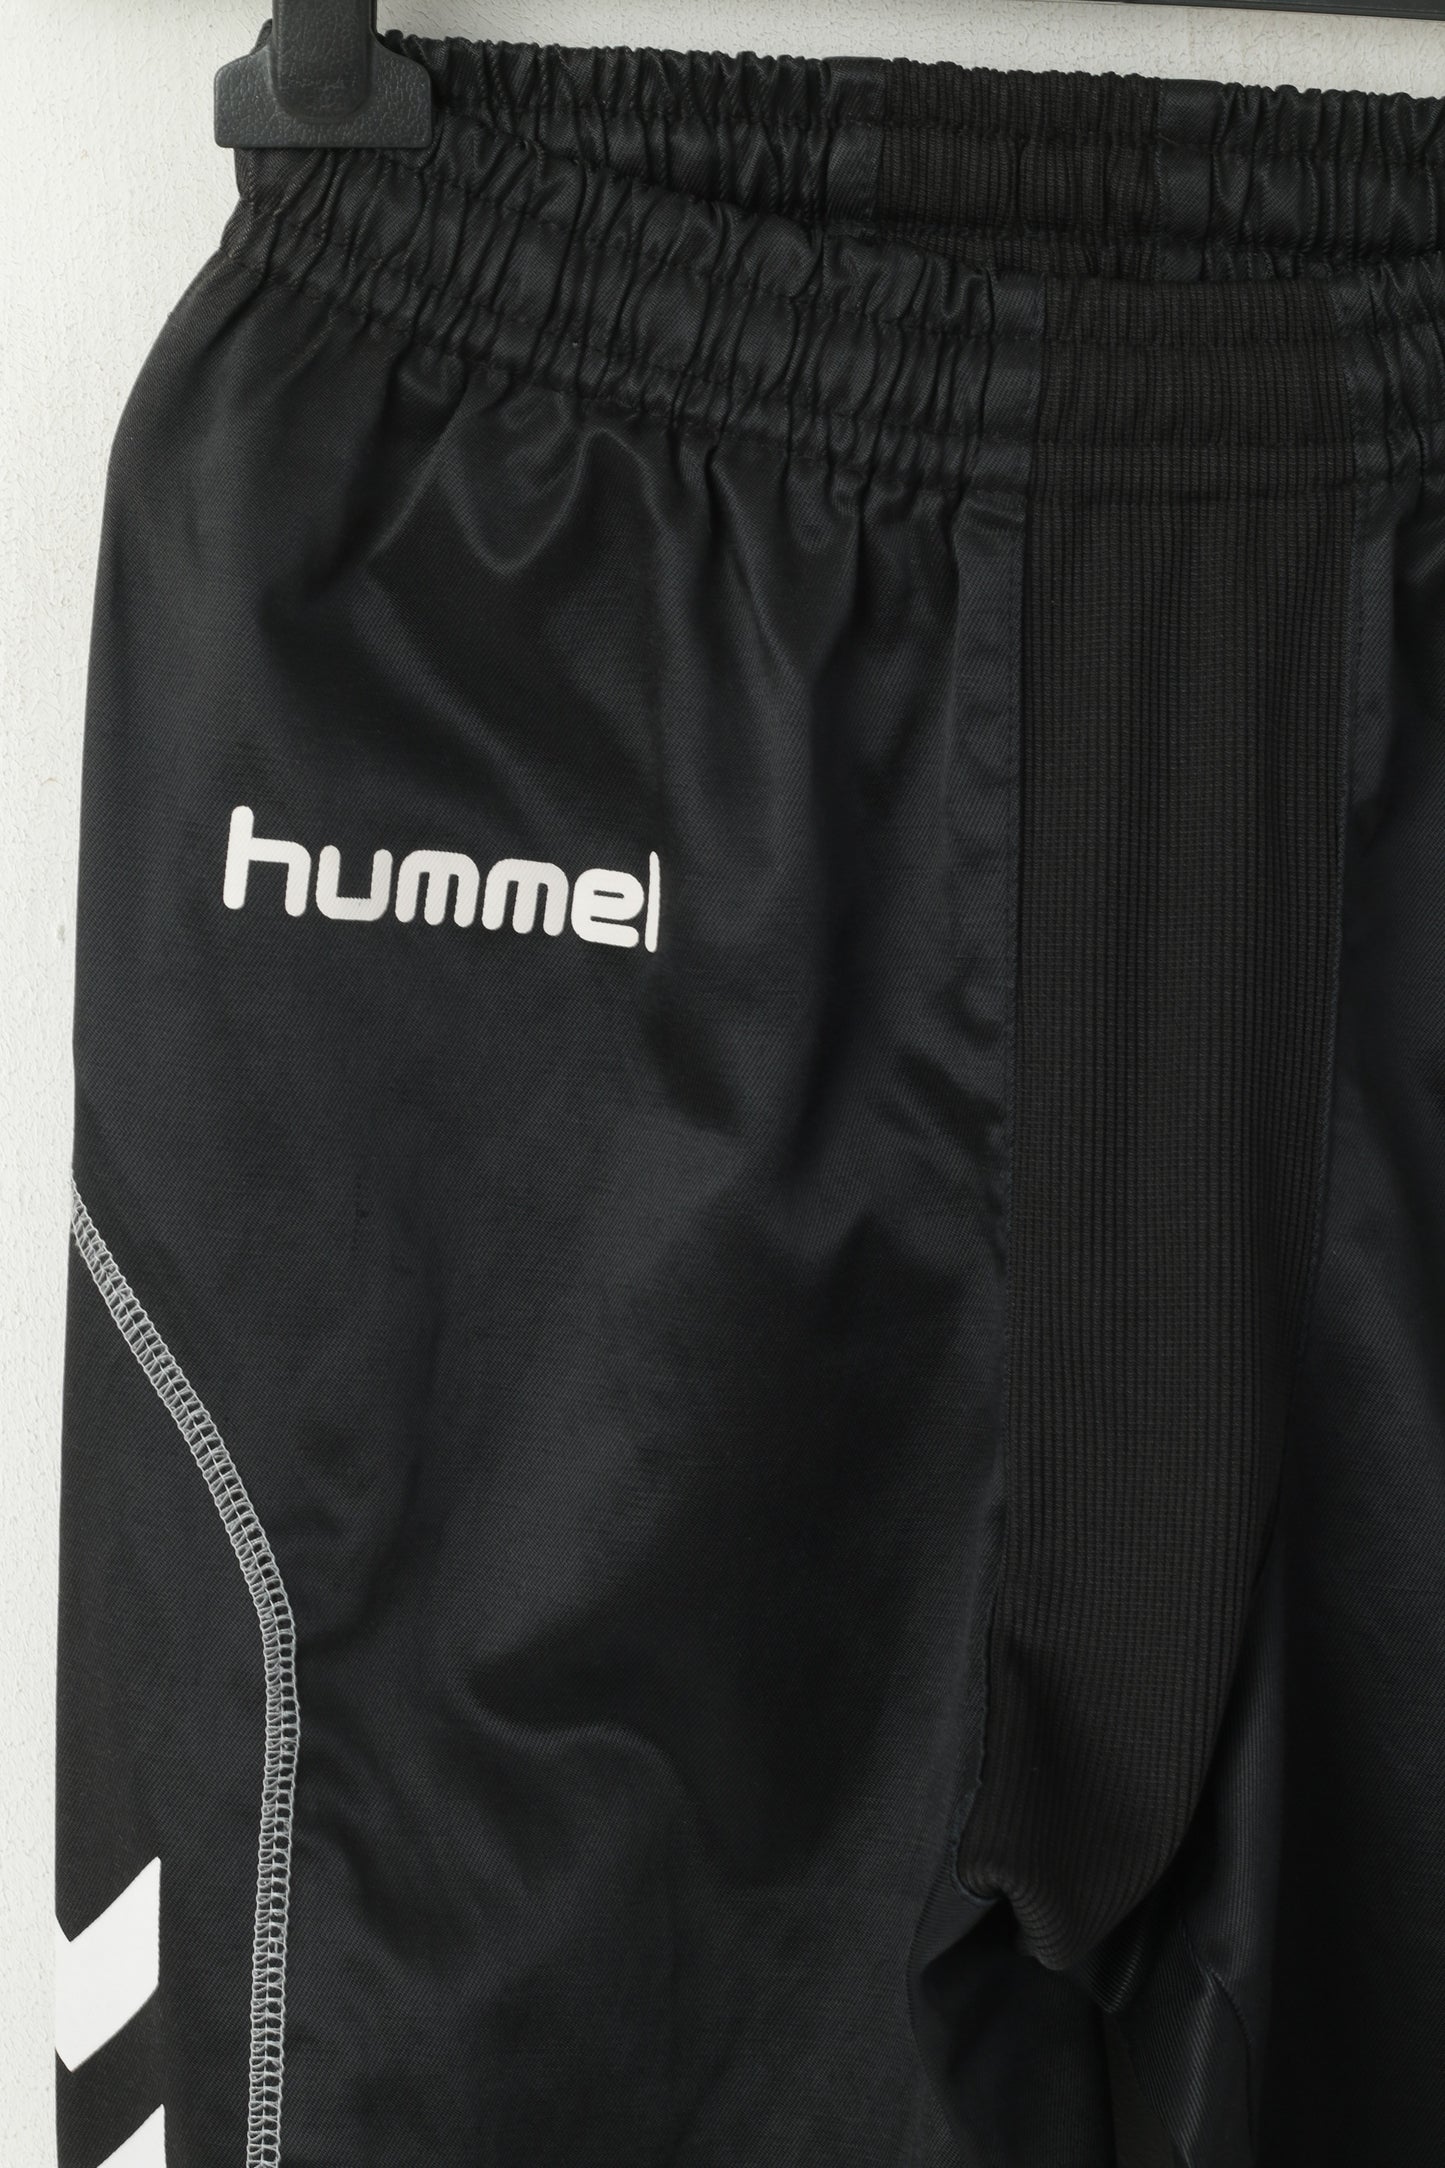 Hummel Youth 16 Age 176 Trousers Black Knee-Length Sport Knickers Goalie Pant